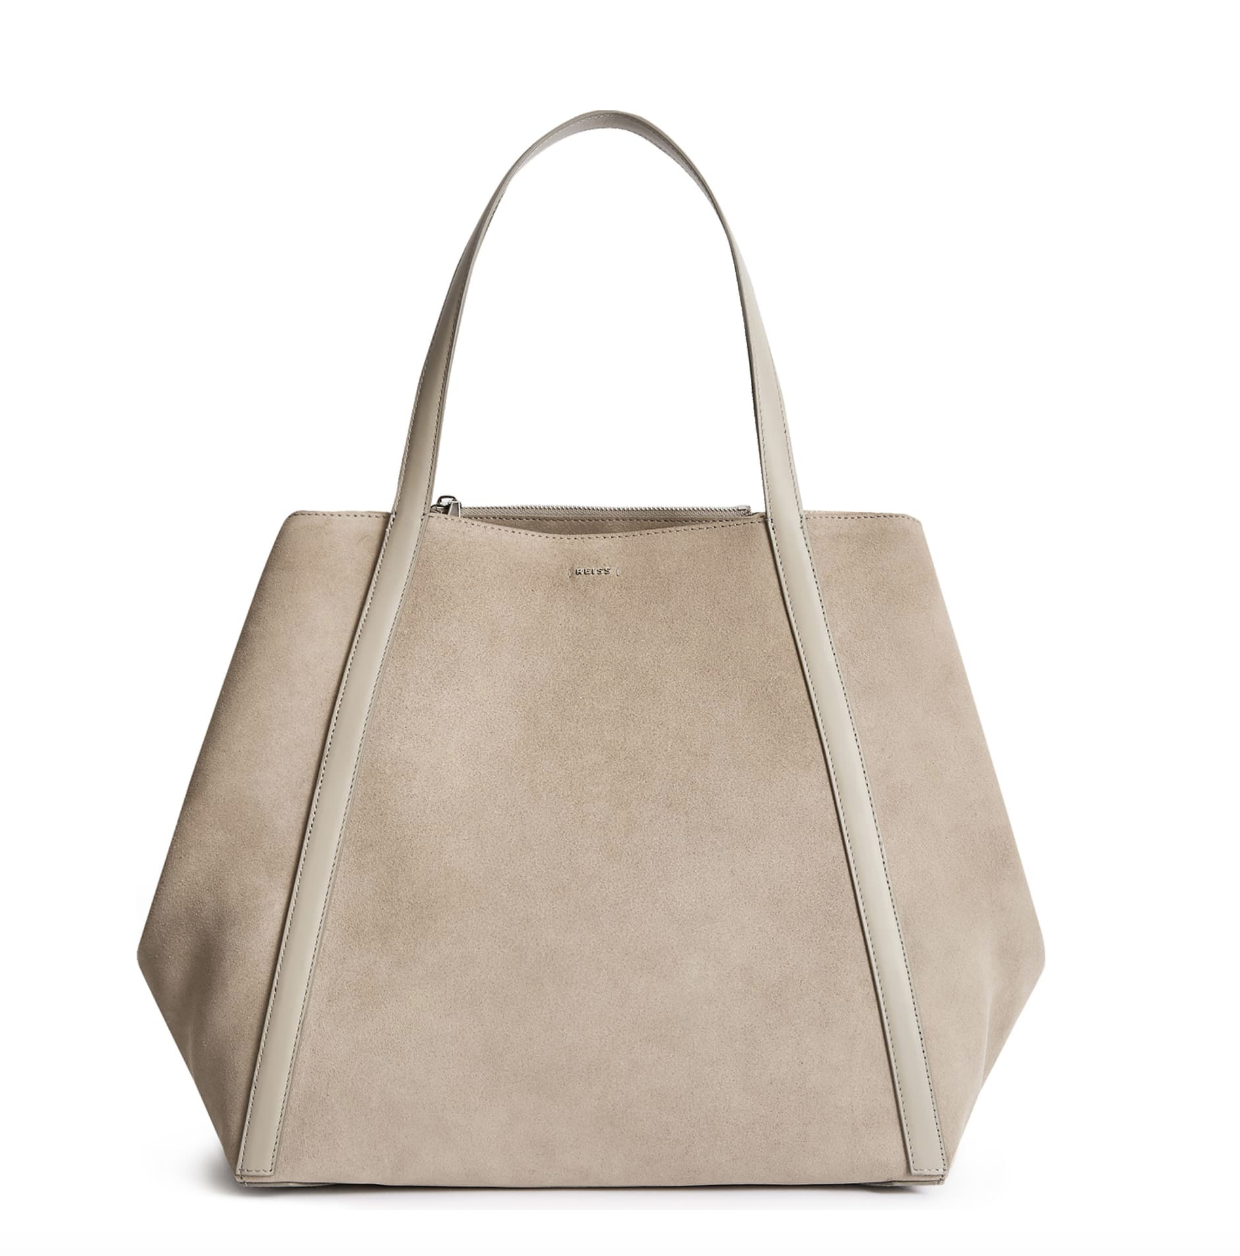 Norton Leather Tote - $295 from Nordstrom